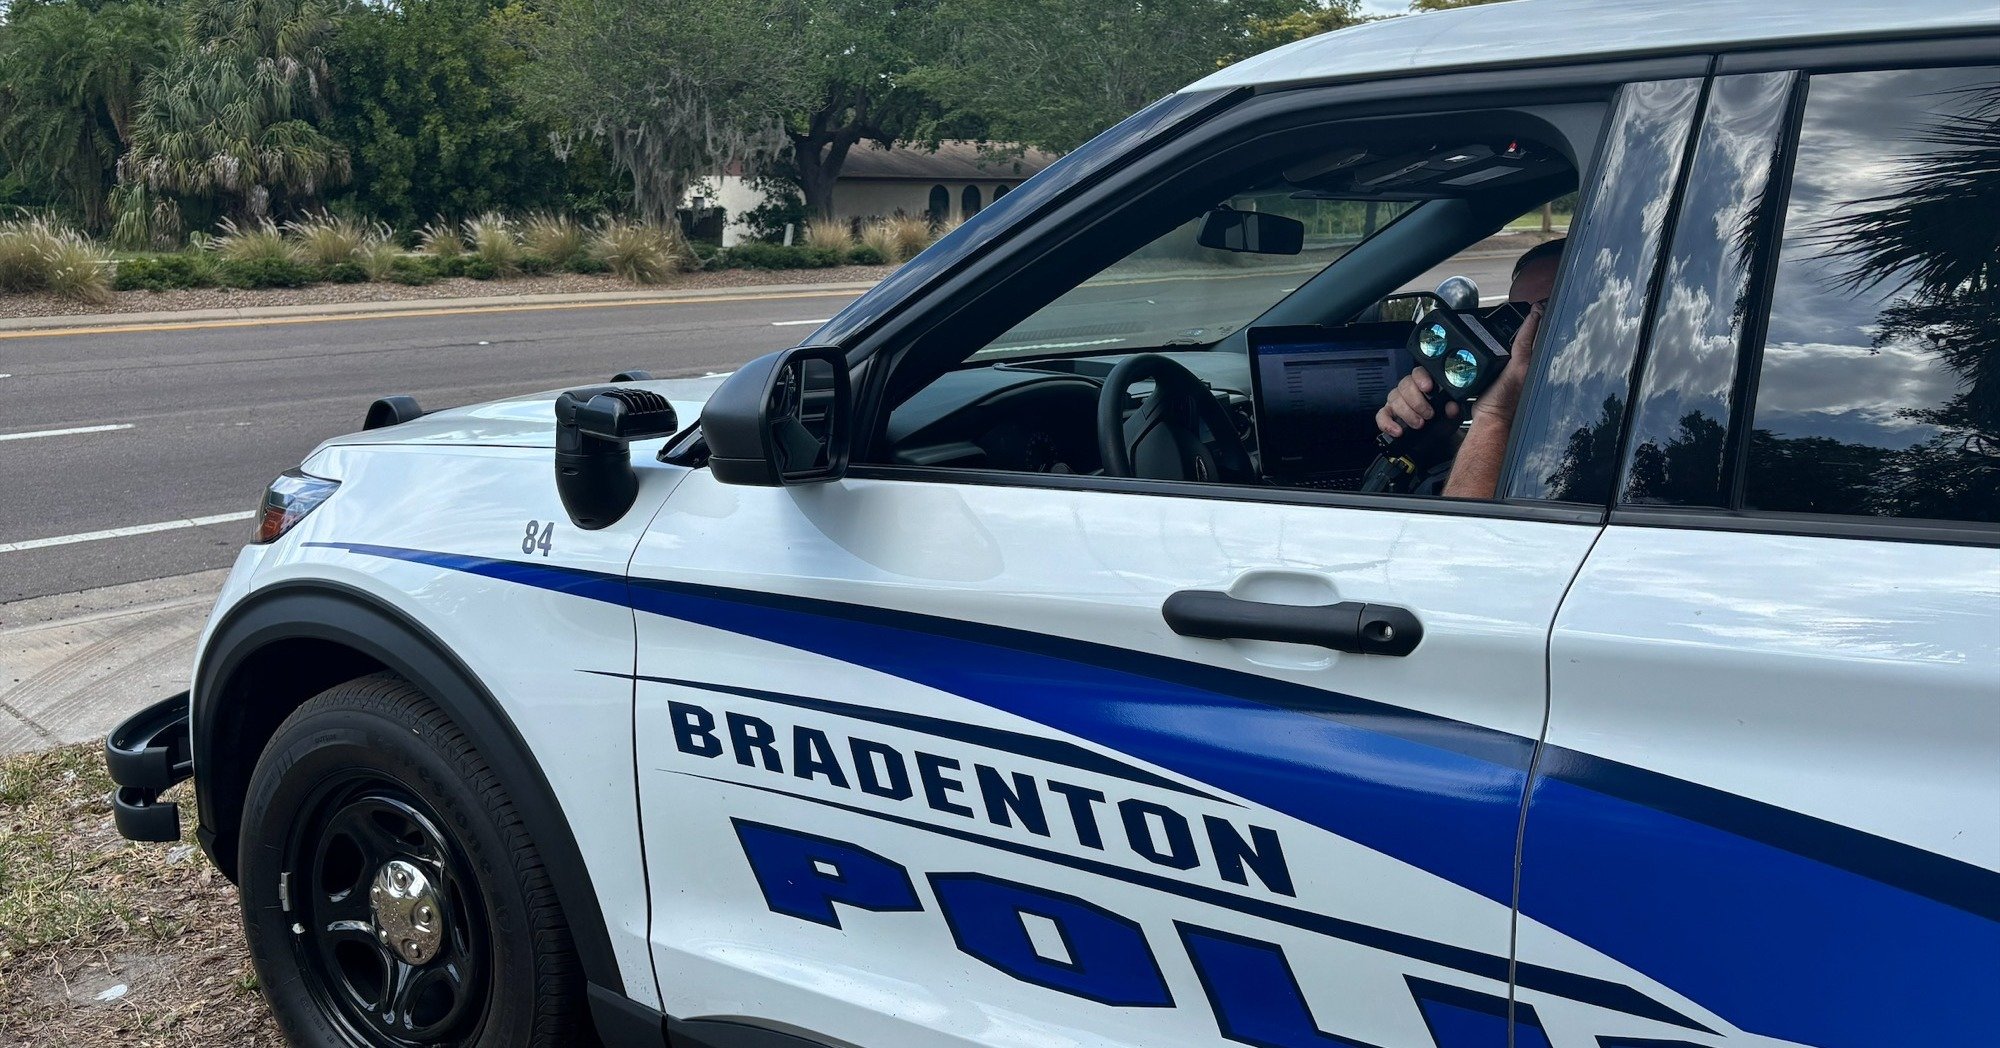 Our speed-enforcement efforts are anything but covert. If you're paying attention (which is always recommended), you'll 1) see the posted speed limit and 2) see our officers looking for speeders. Our officers wrote 15 speeding tickets last Sunday and